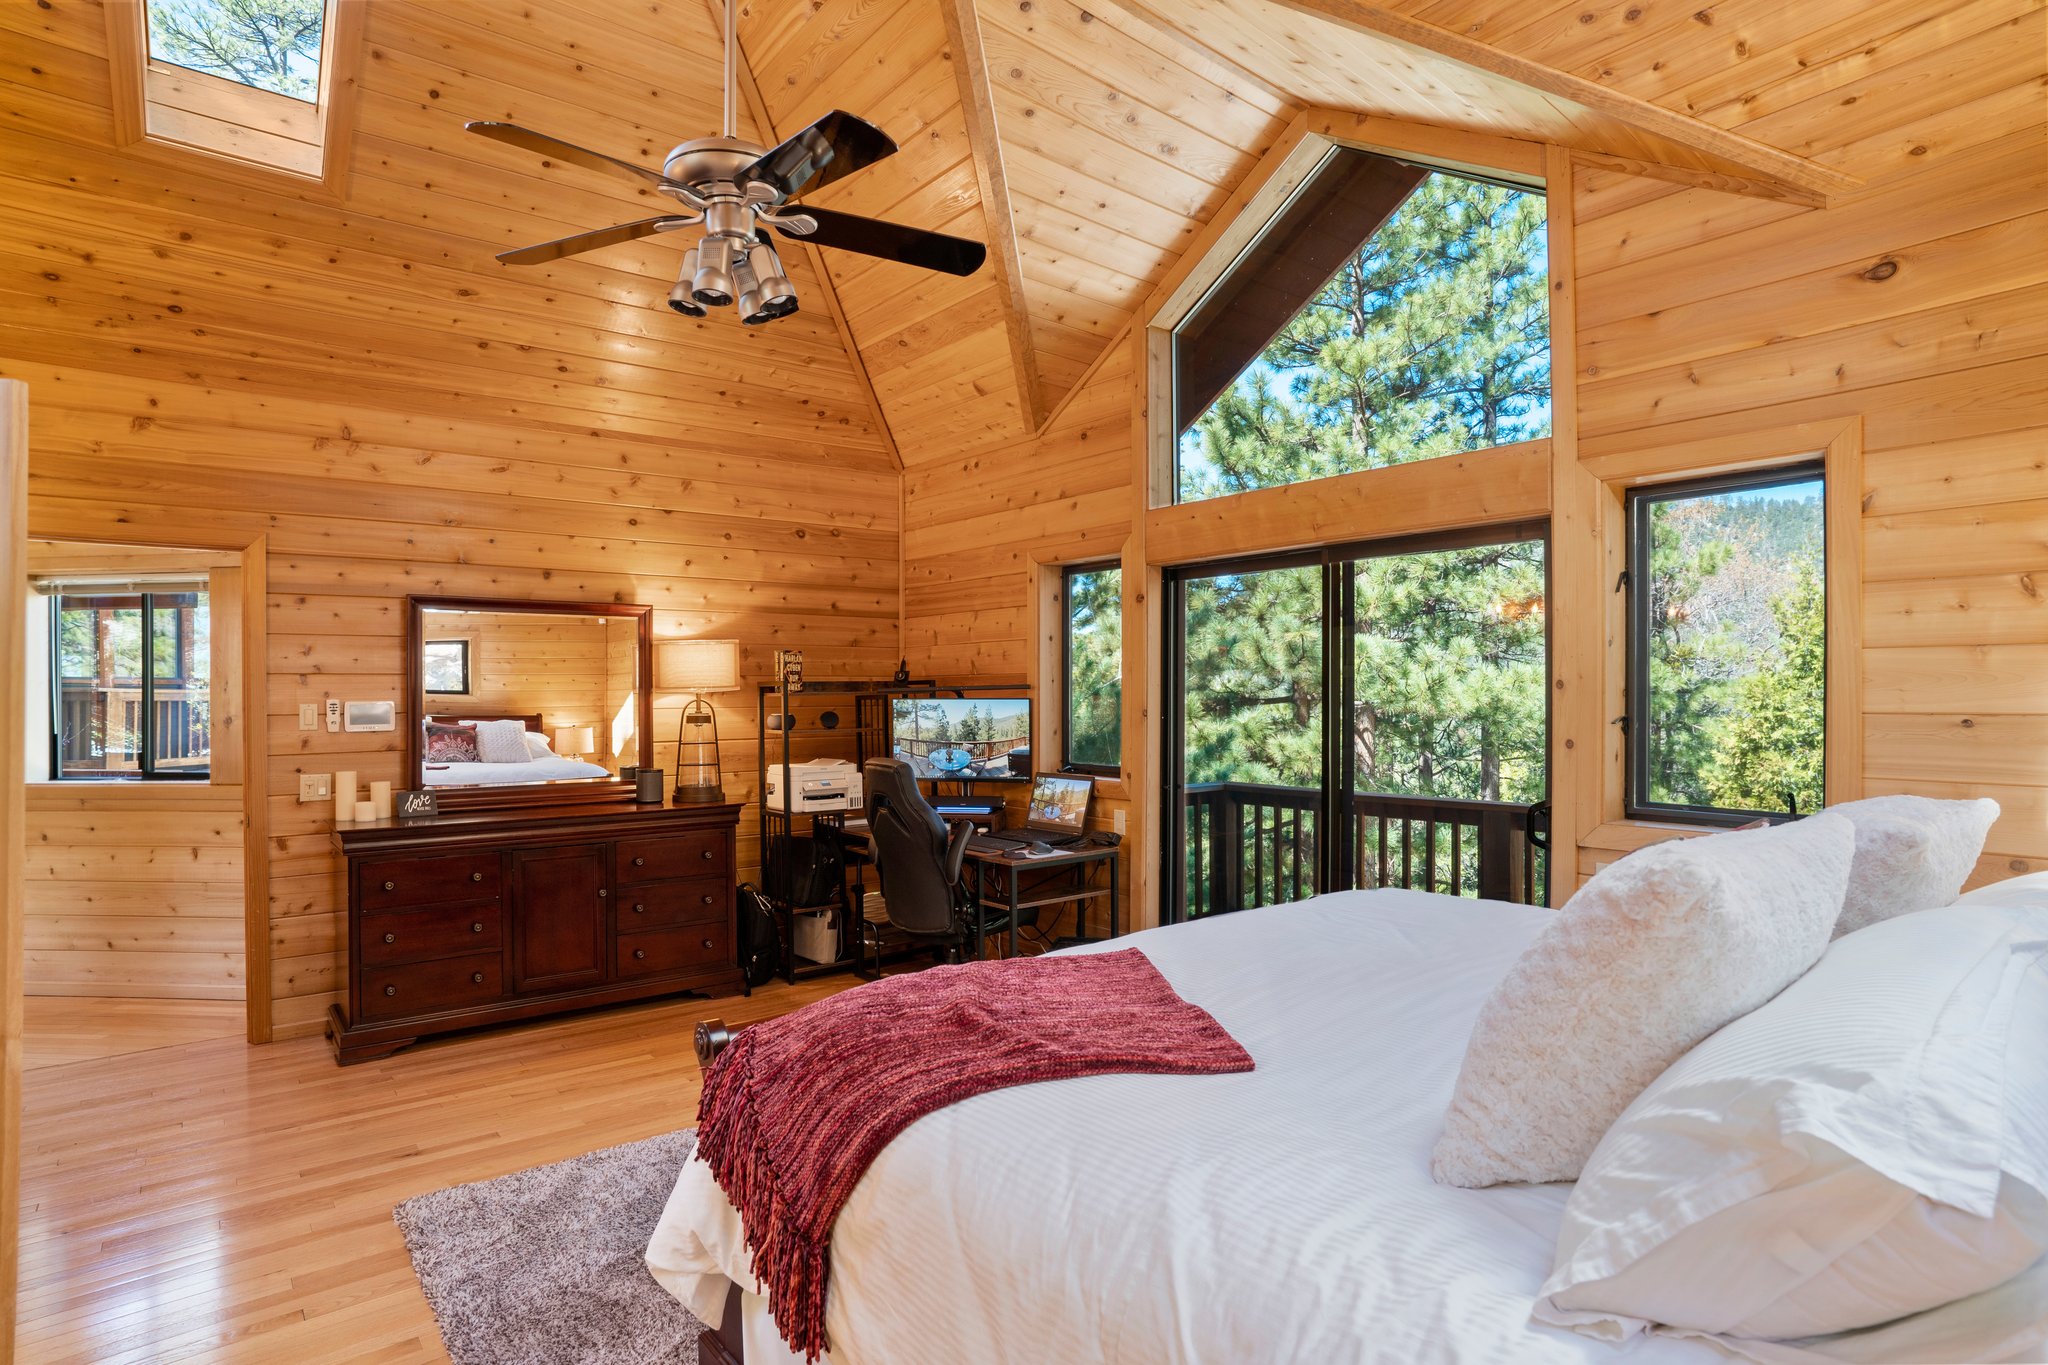 Master bedroom with high ceilings and views.